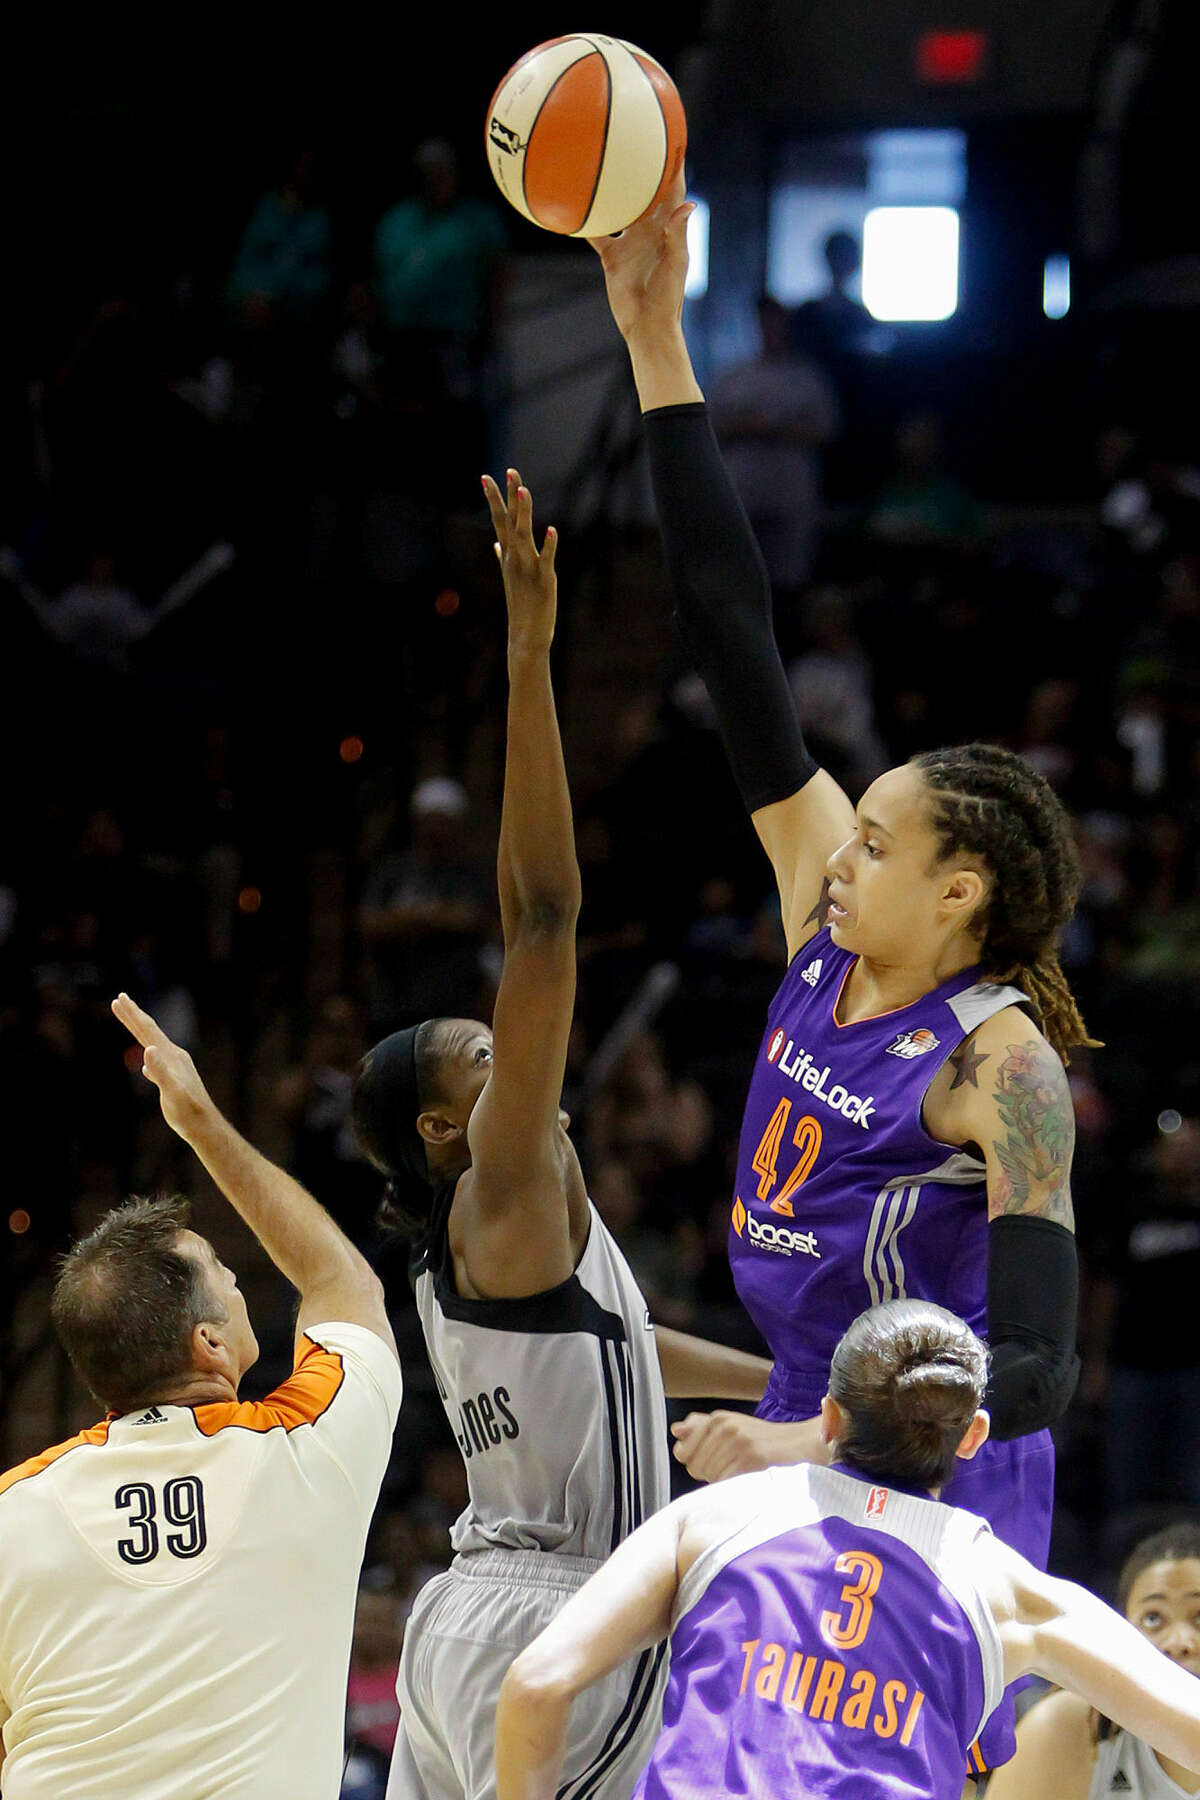 Phoenix center Brittney Griner controls the opening tip against the Silver Stars' DeLisha Milton-Jones. The ex-Baylor superstar had 26 points, seven rebounds and five blocks in her first WNBA game in San Antonio.